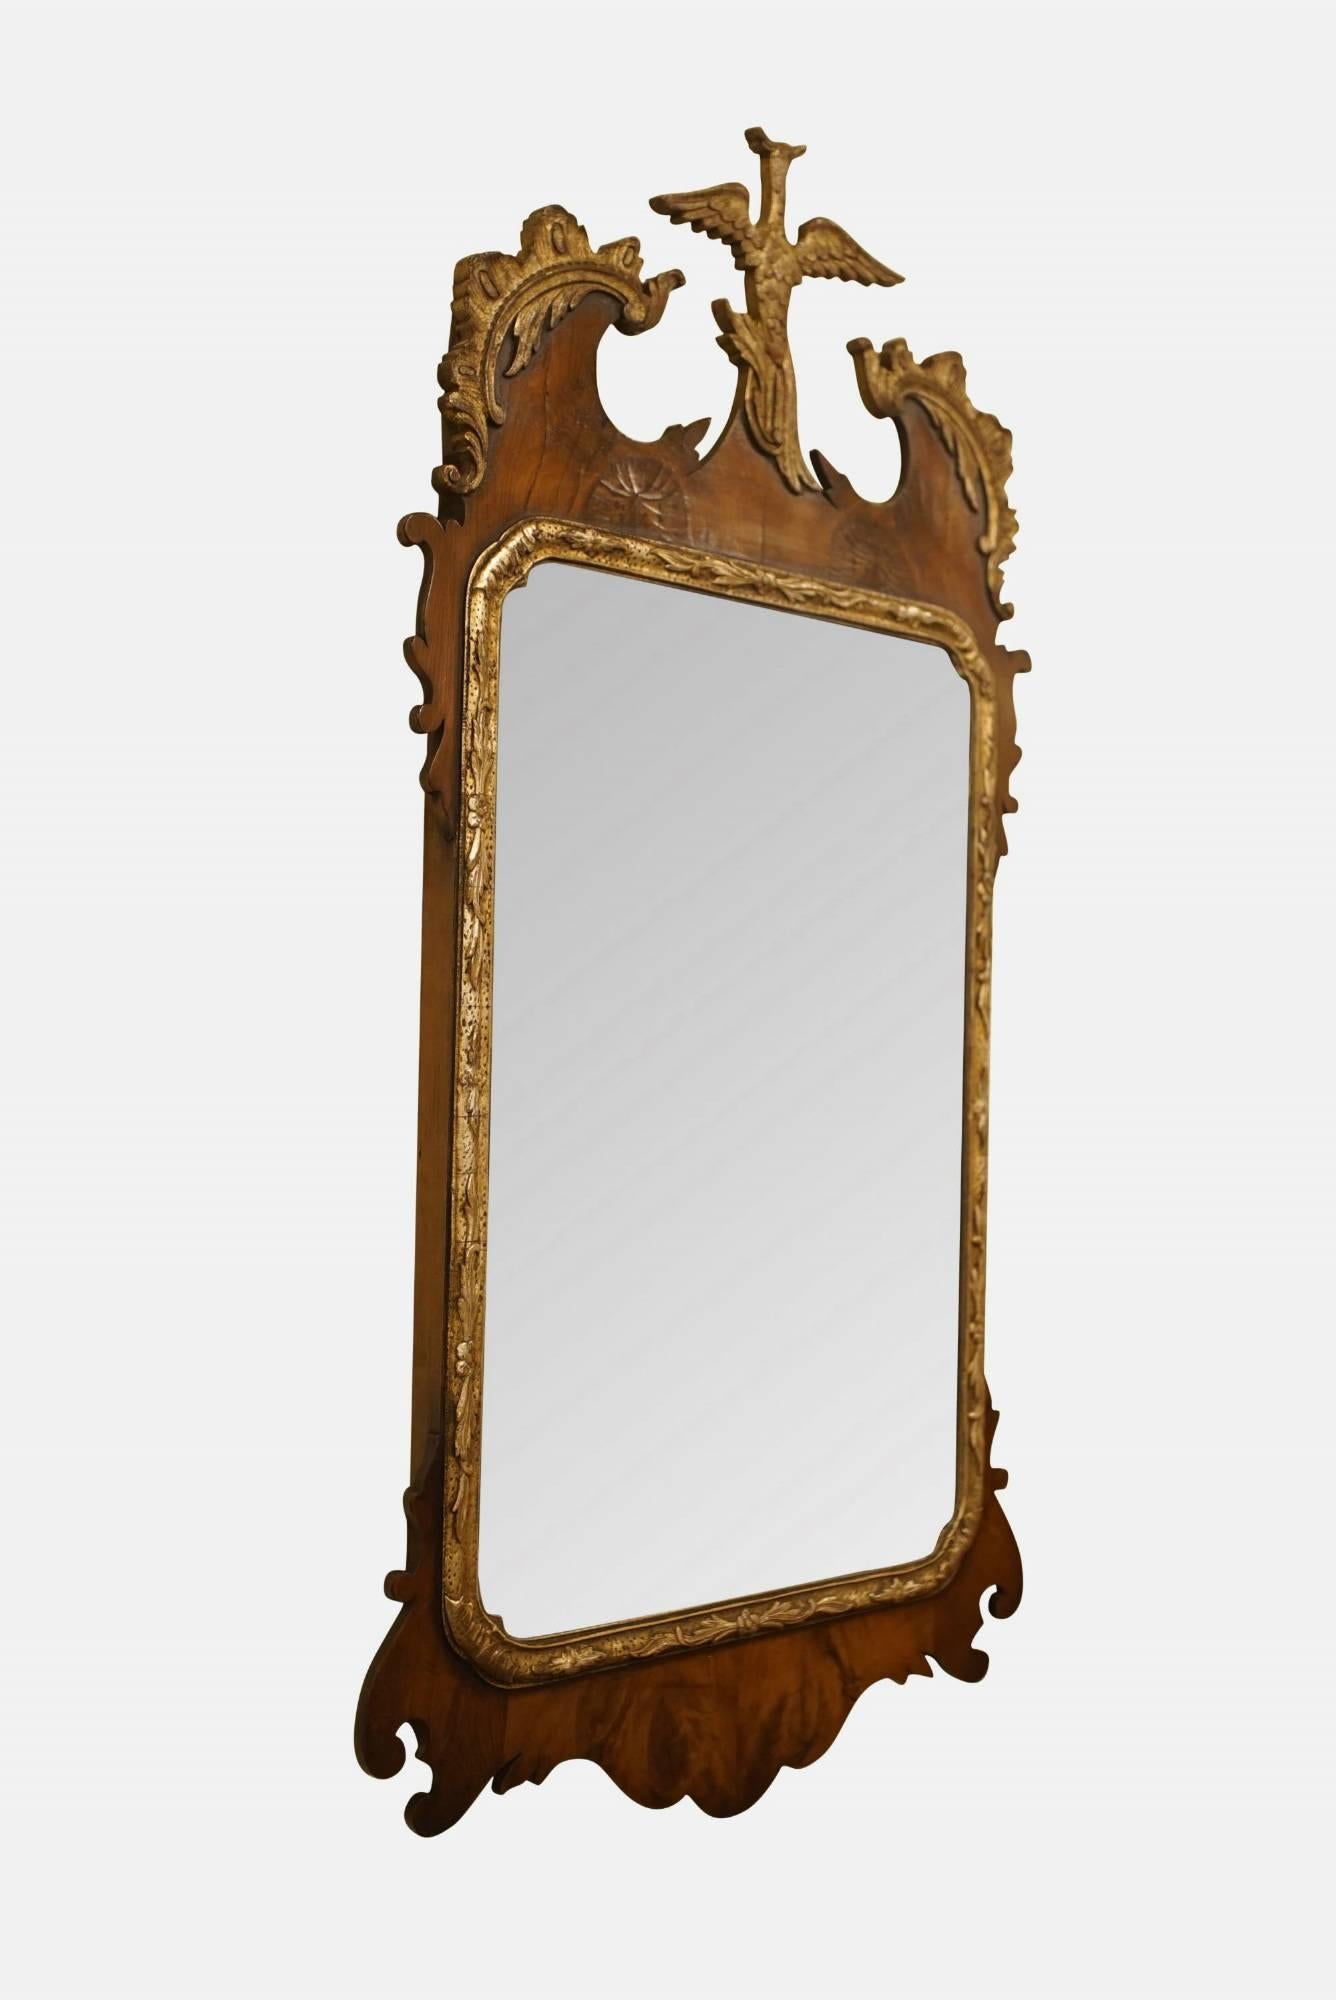 19th Century Yew Wood and Silver Gilt Mirror 1